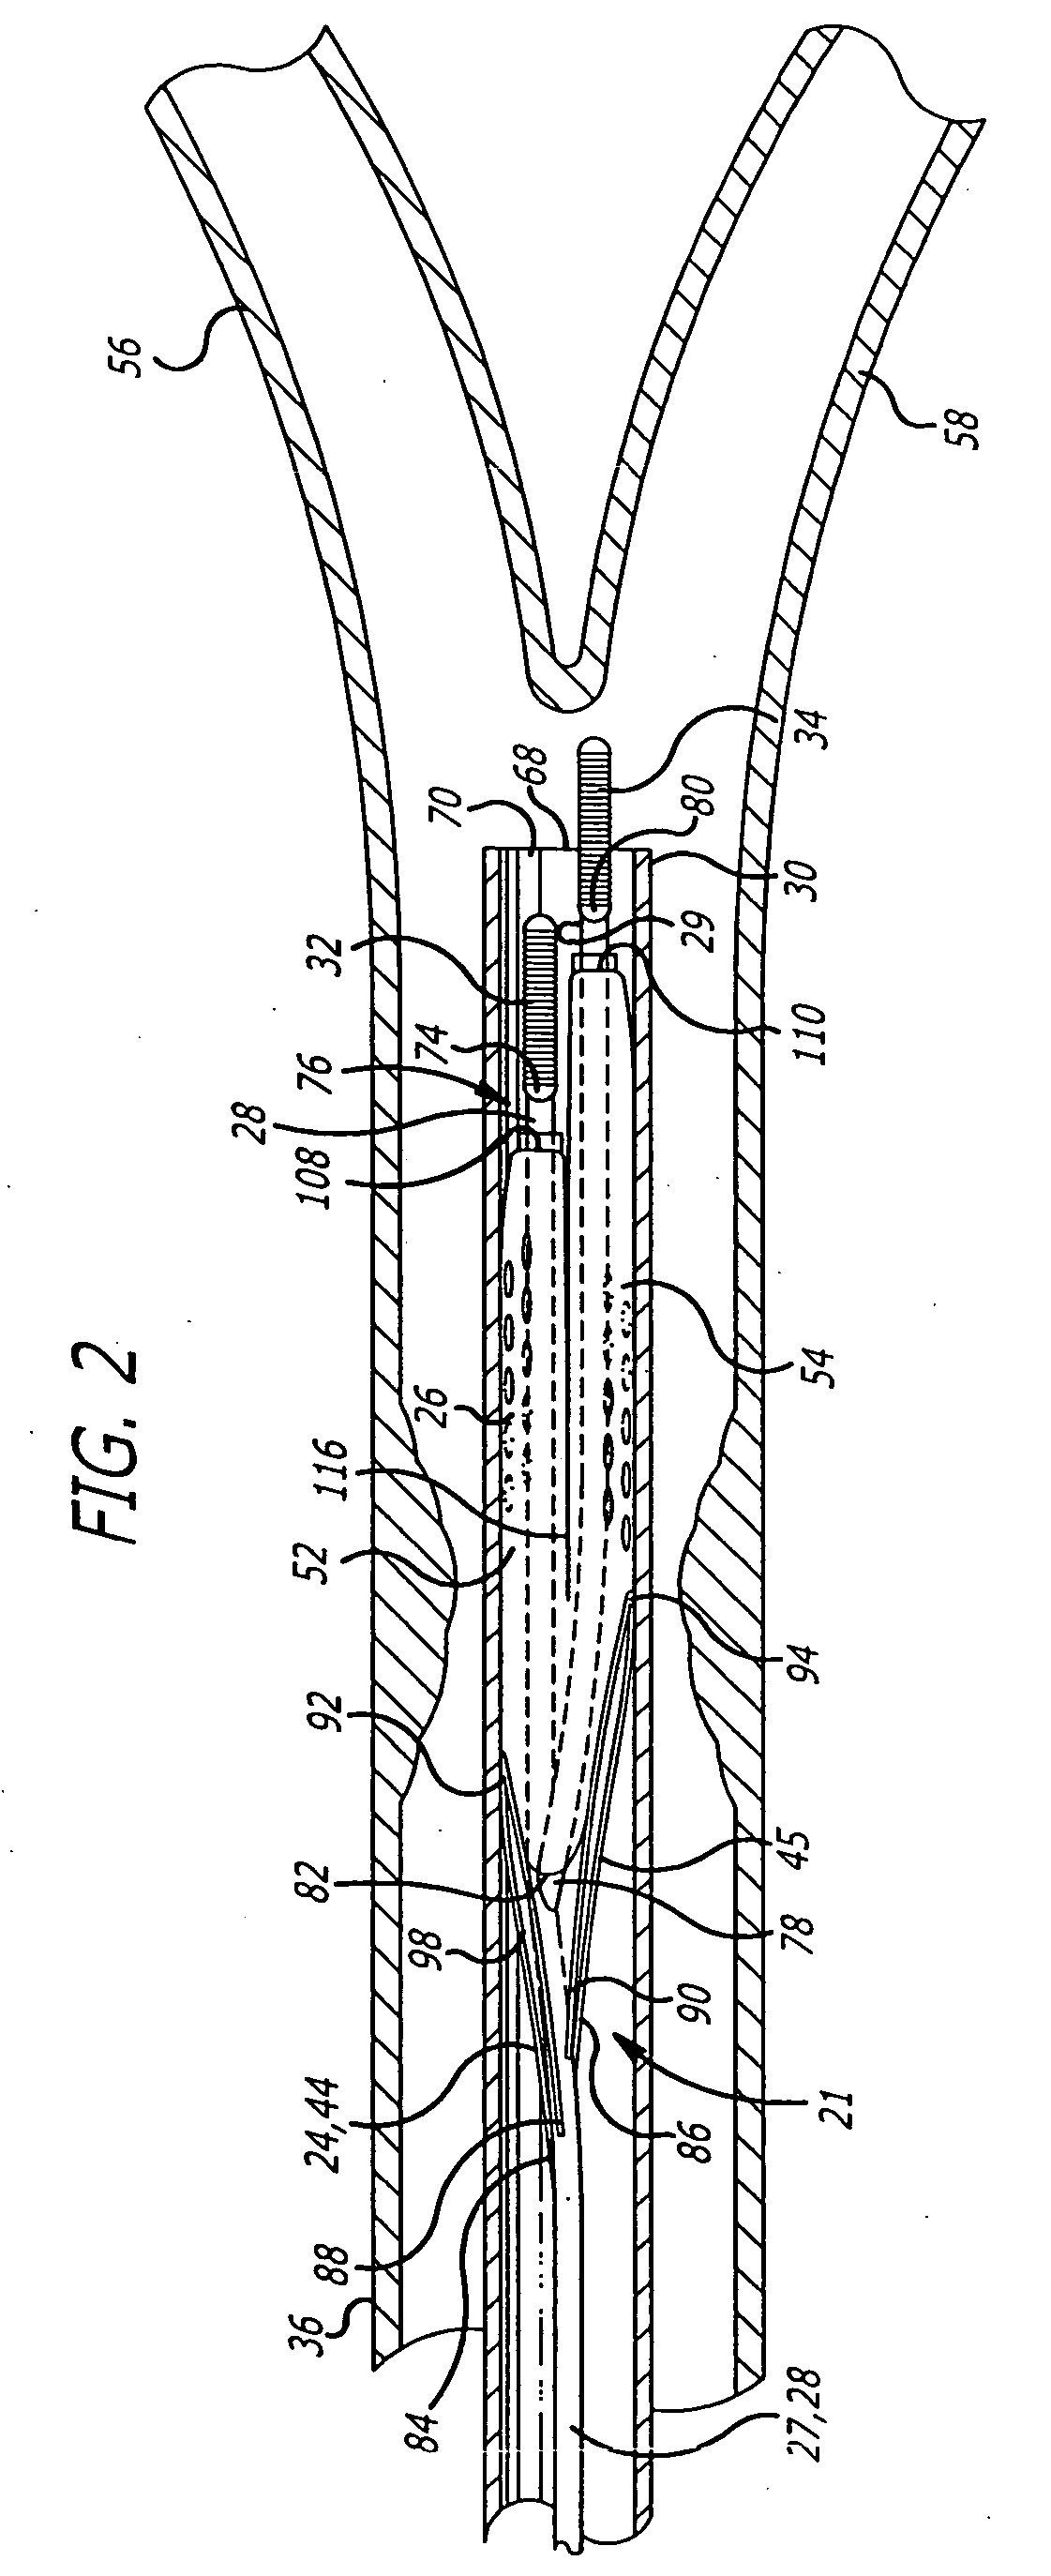 Embolic filtering devices for bifurcated vessels